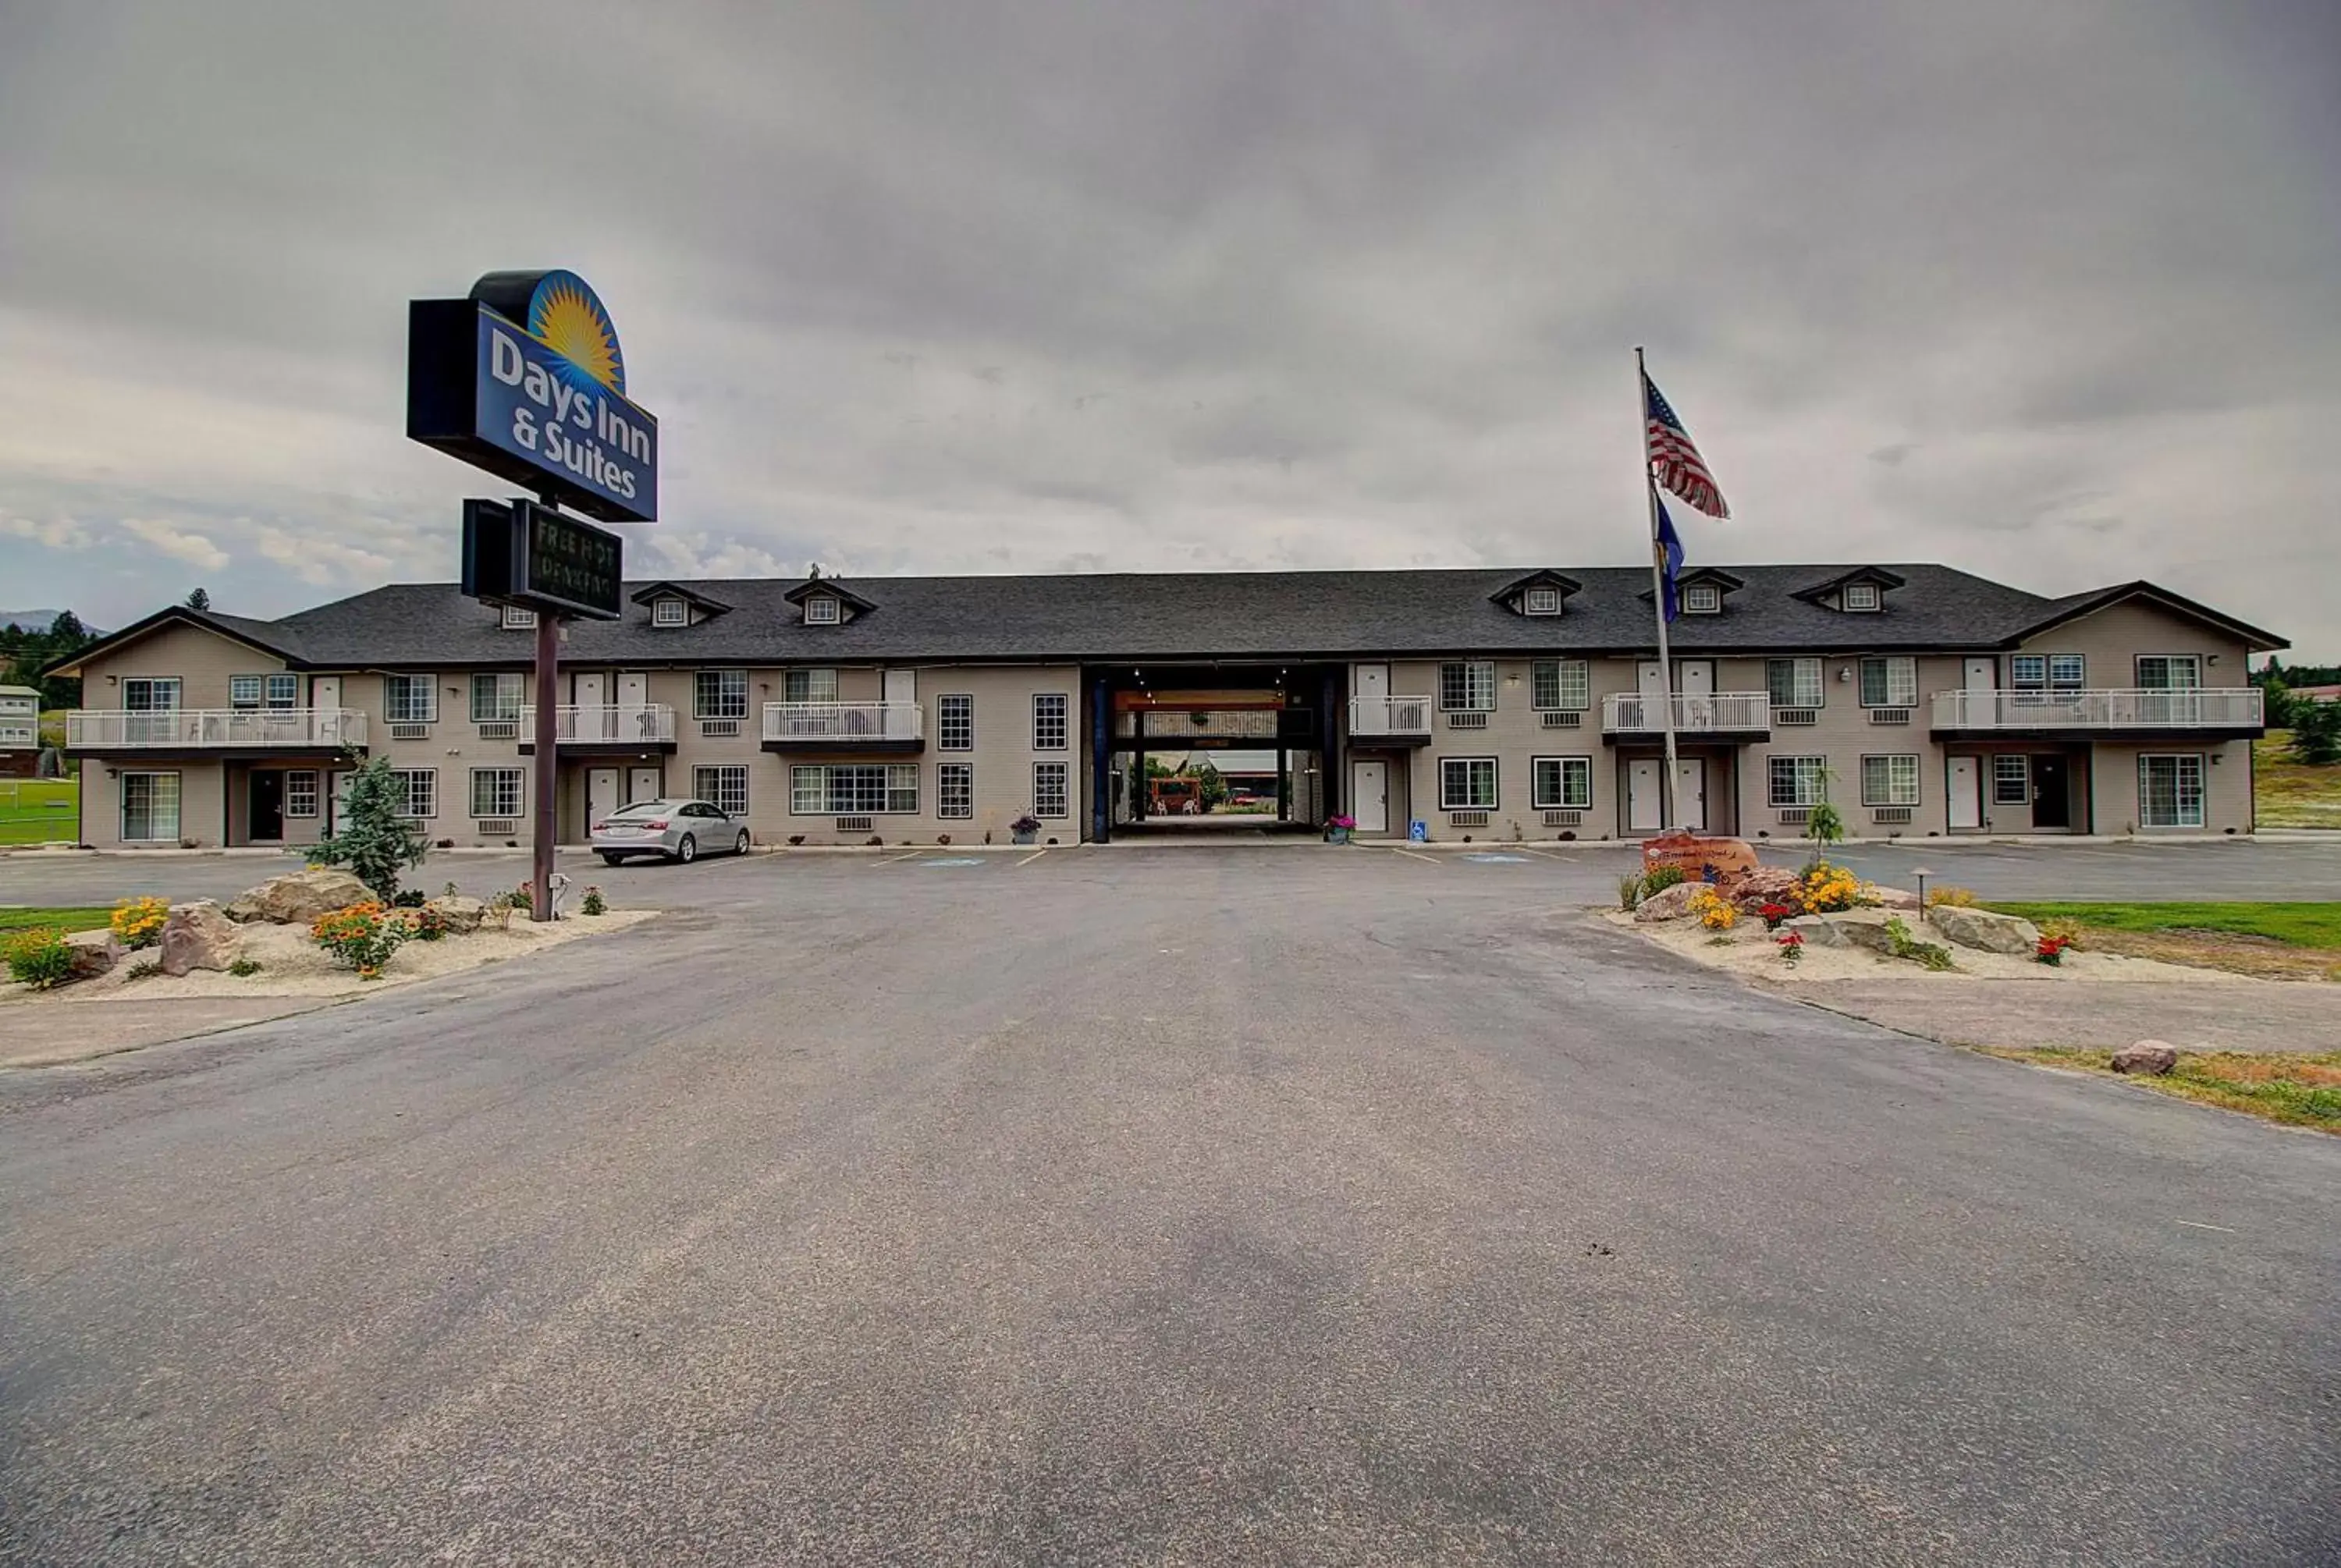 Property Building in Days Inn & Suites by Wyndham Lolo